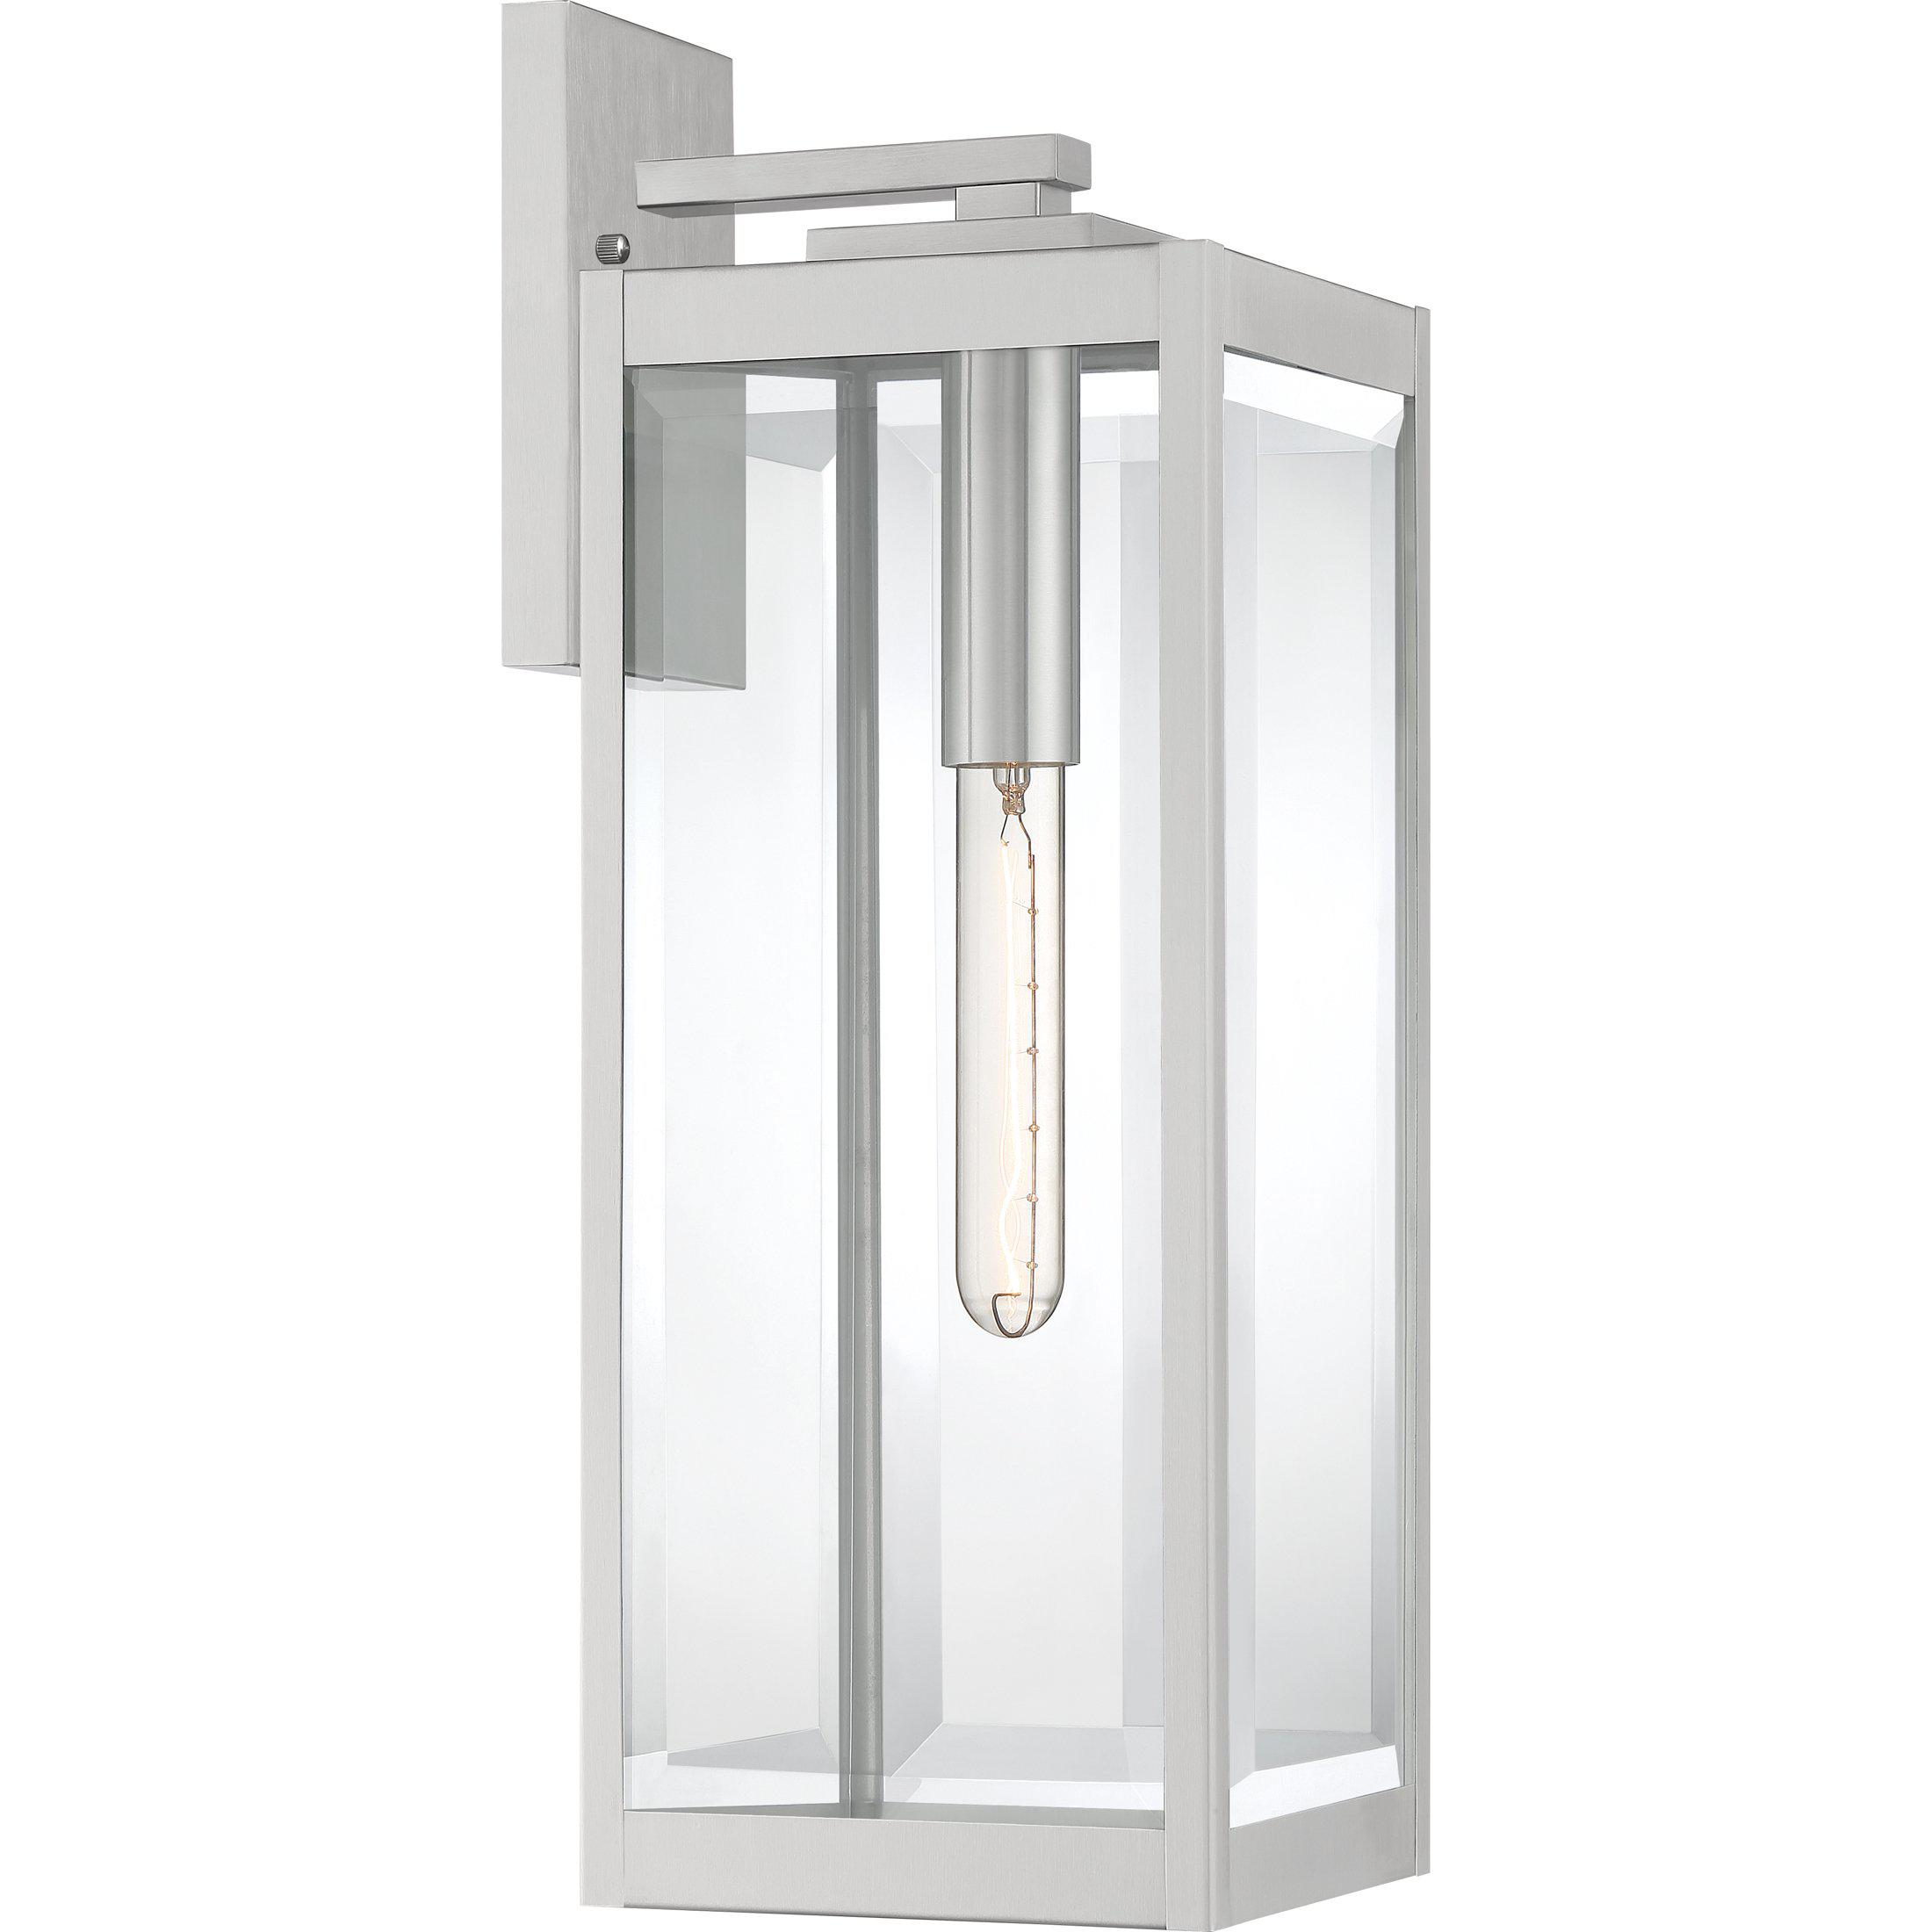 Quoizel  Westover Outdoor Lantern, Large Outdoor l Wall Quoizel Stainless Steel  